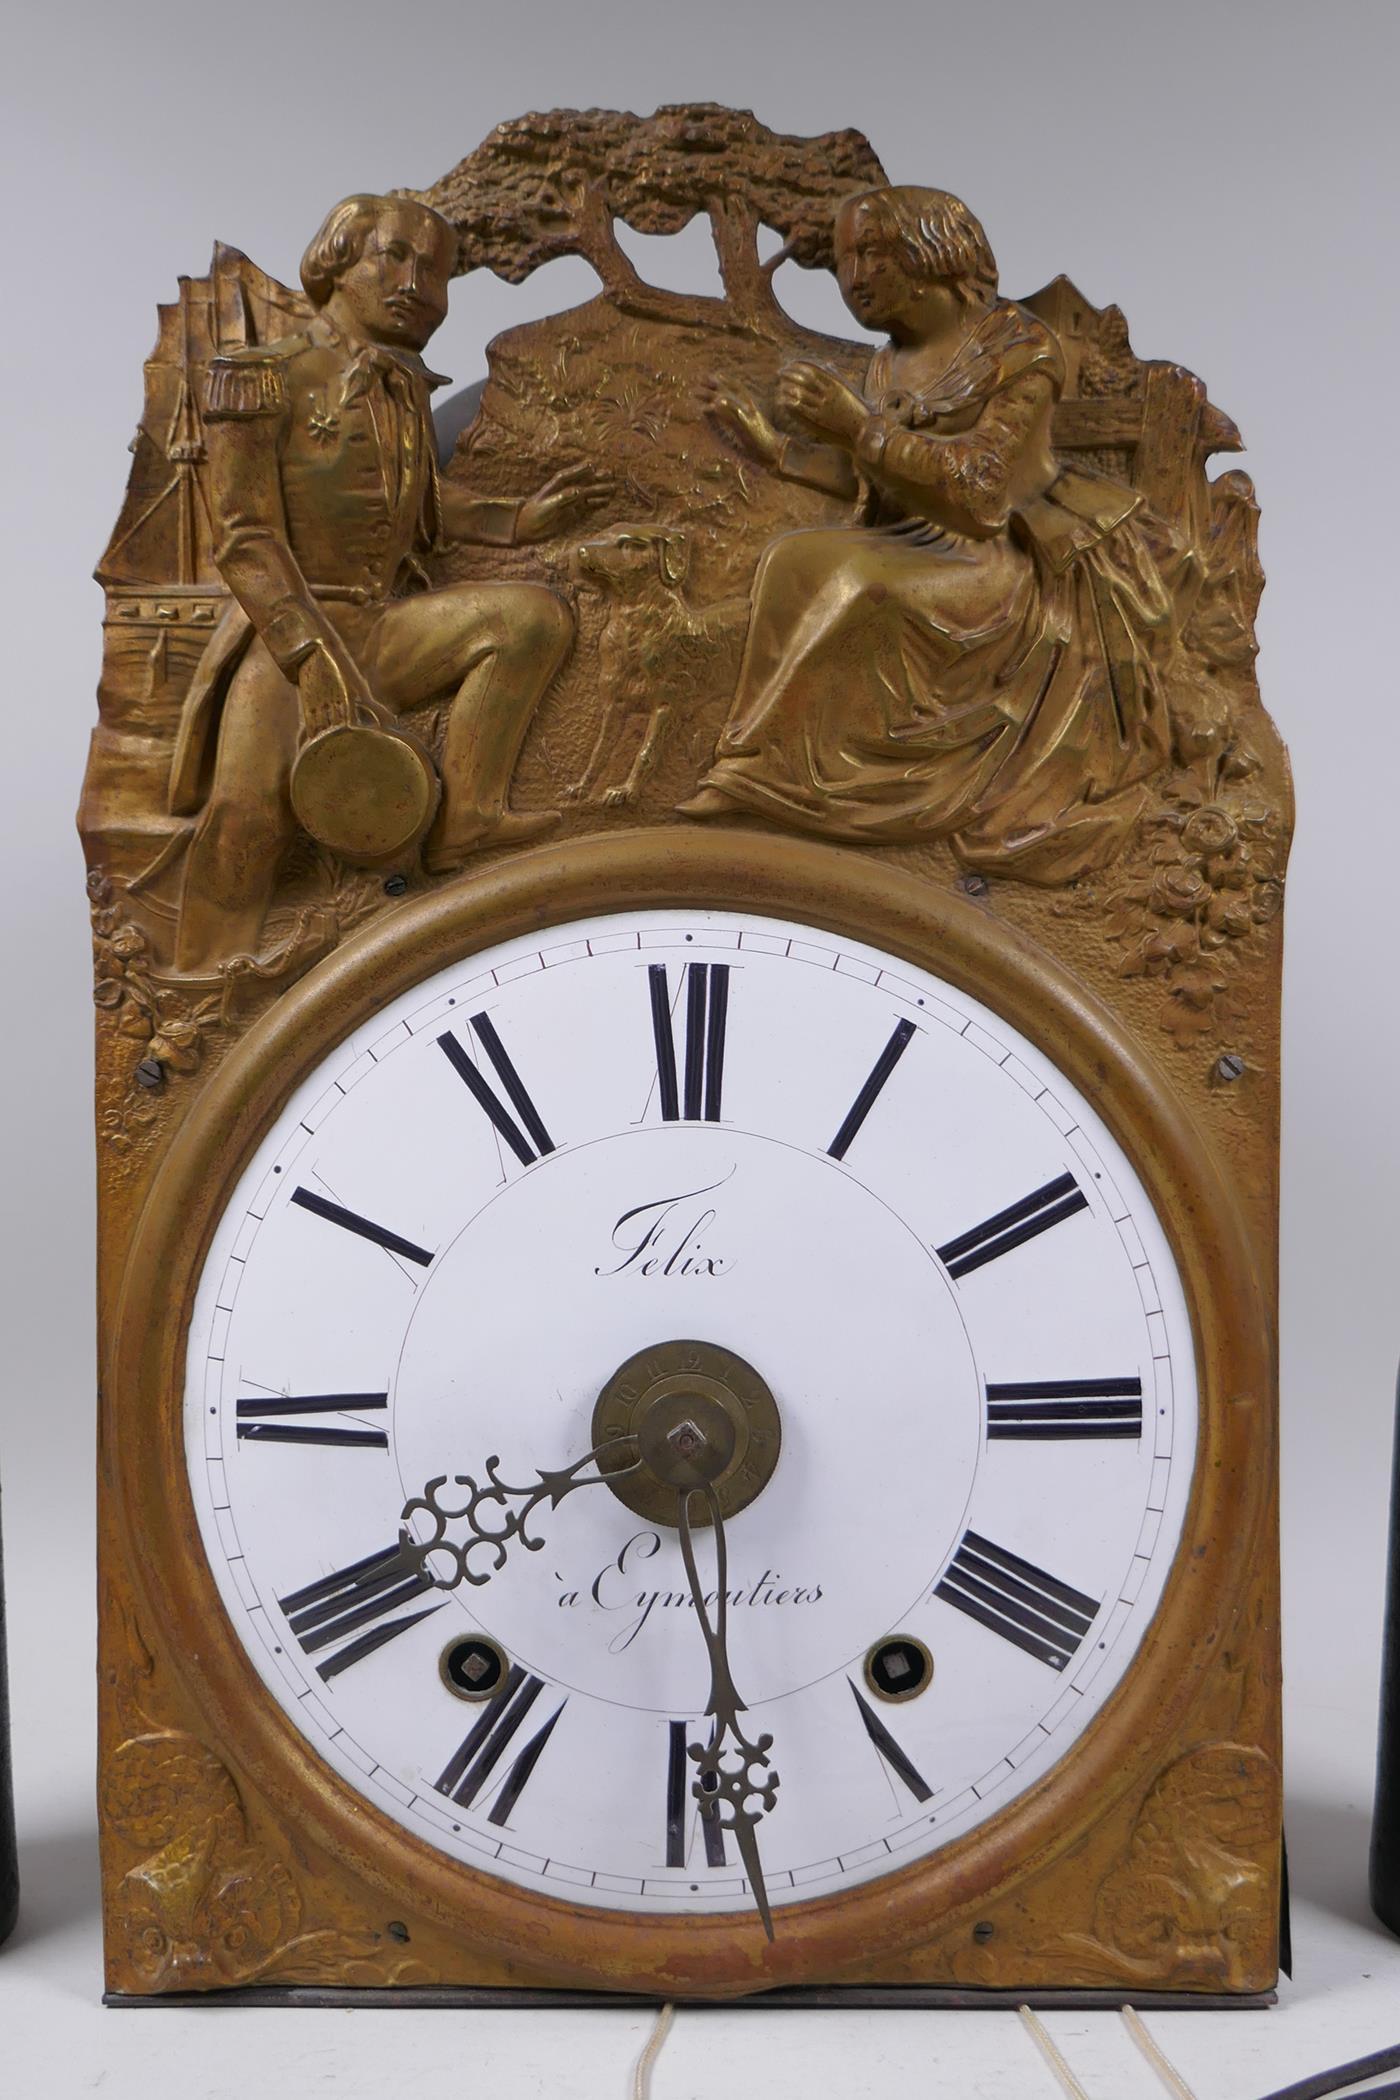 An early C19th French comtoise clock with repousse brass surround, enamel dial - Image 2 of 4